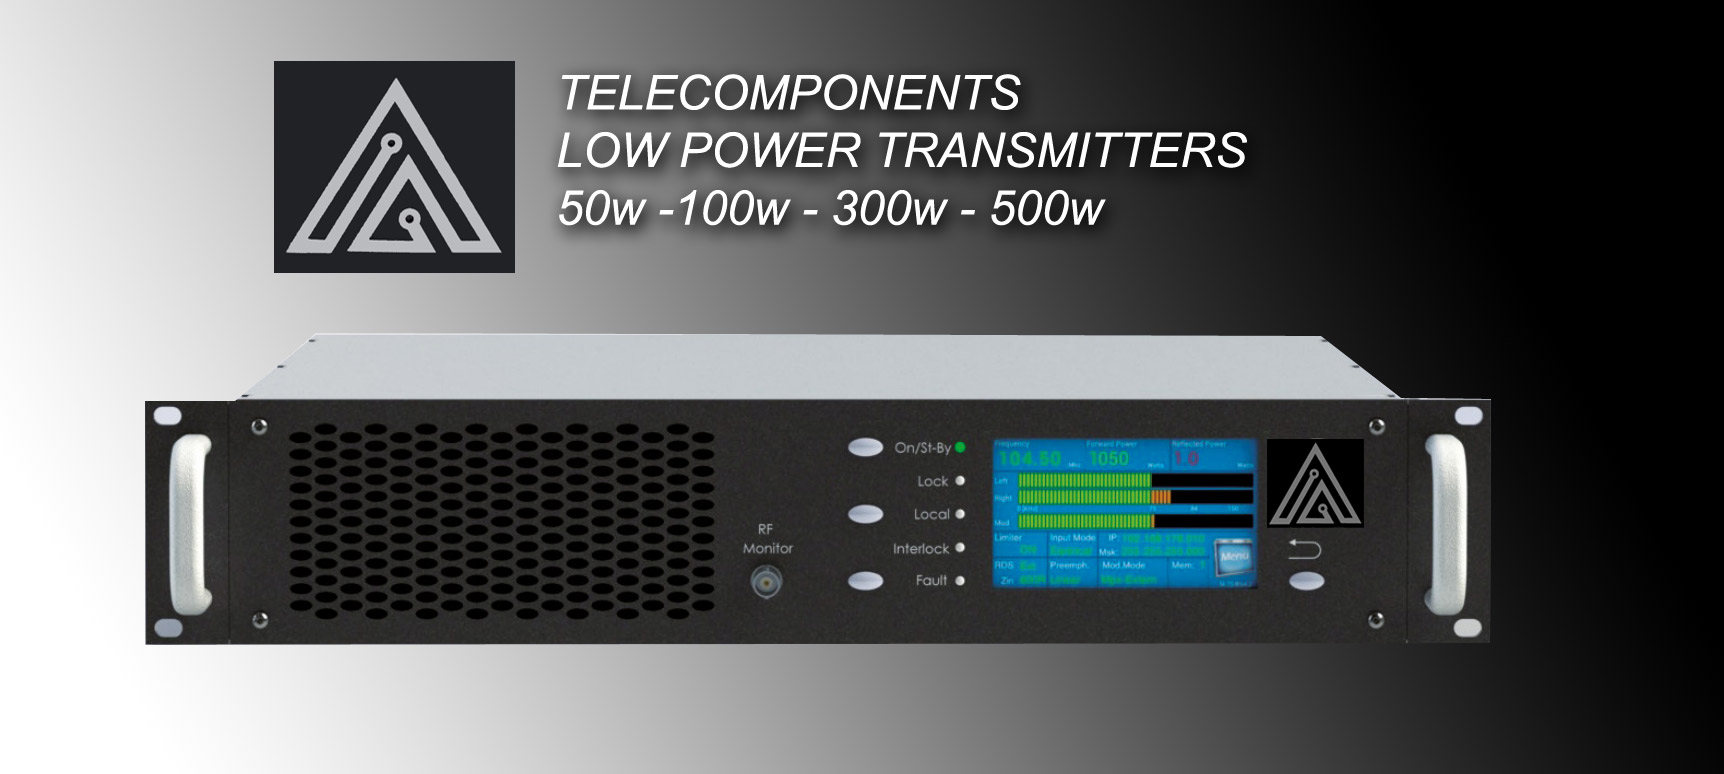 TLDS/ Low Power FM Telecomponents transmitters 50-100-300-500w